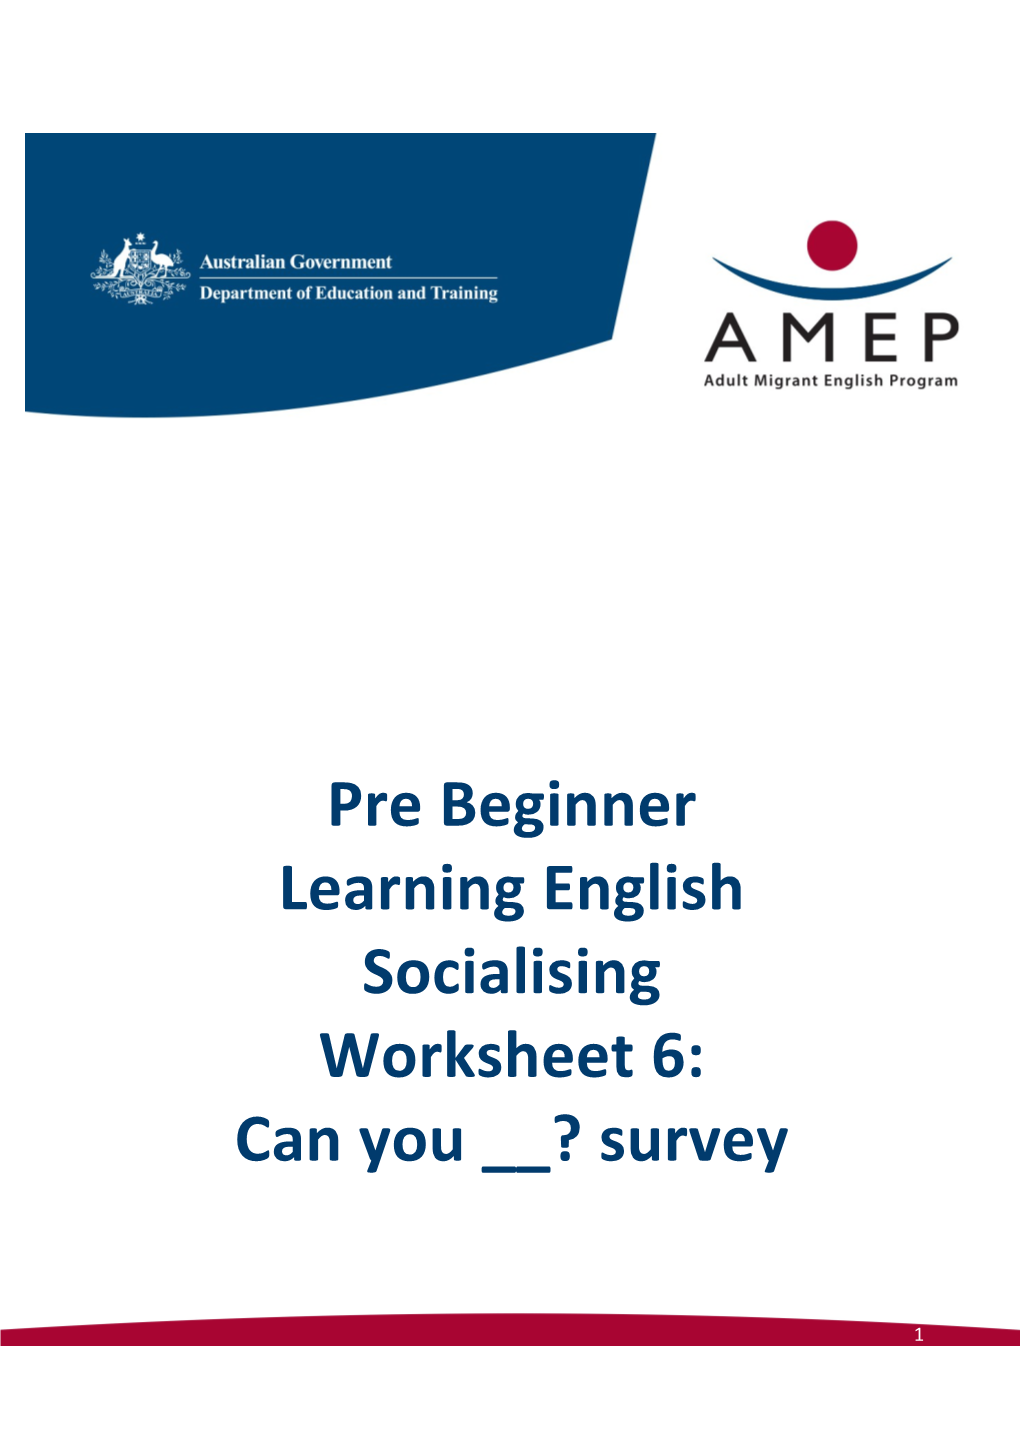 Pre Beginner Learning English Socialising Worksheet 6: Can You __? Survey